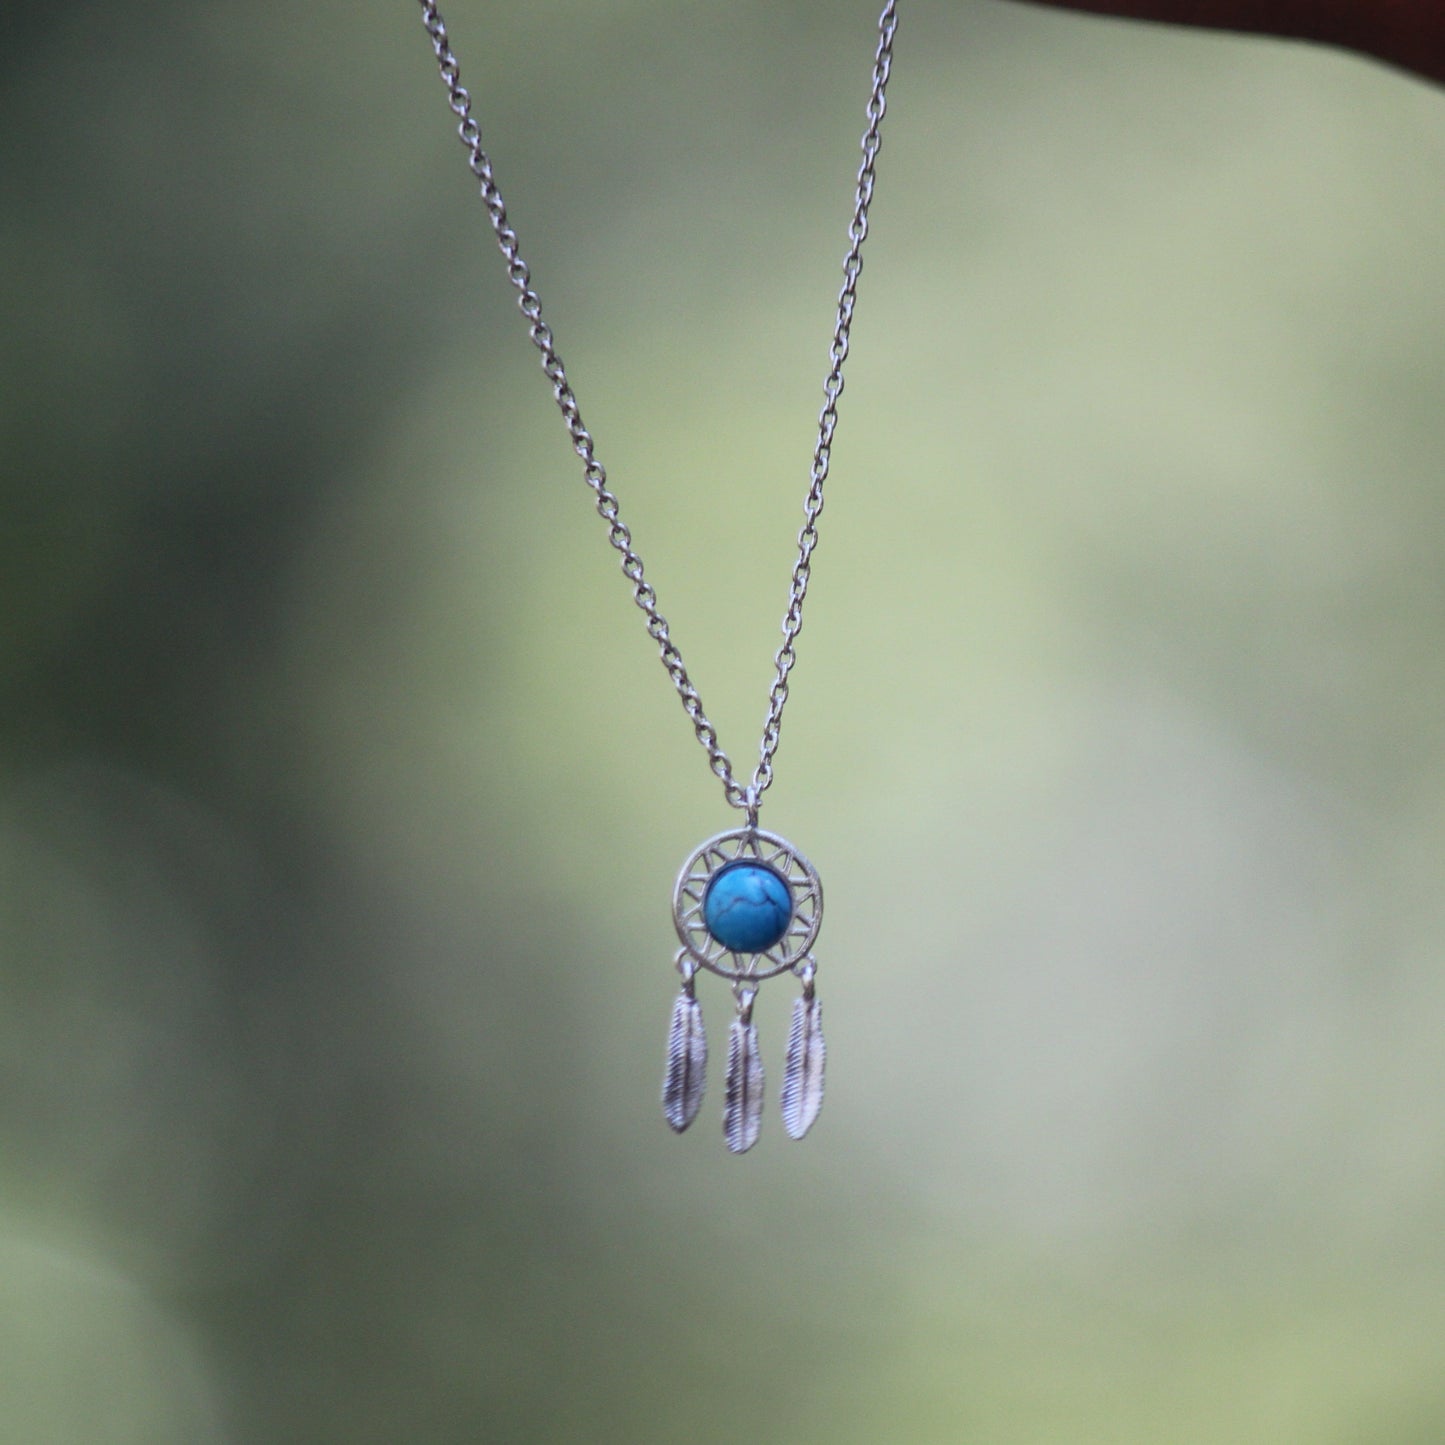 Silver dream catcher with turquoise gem